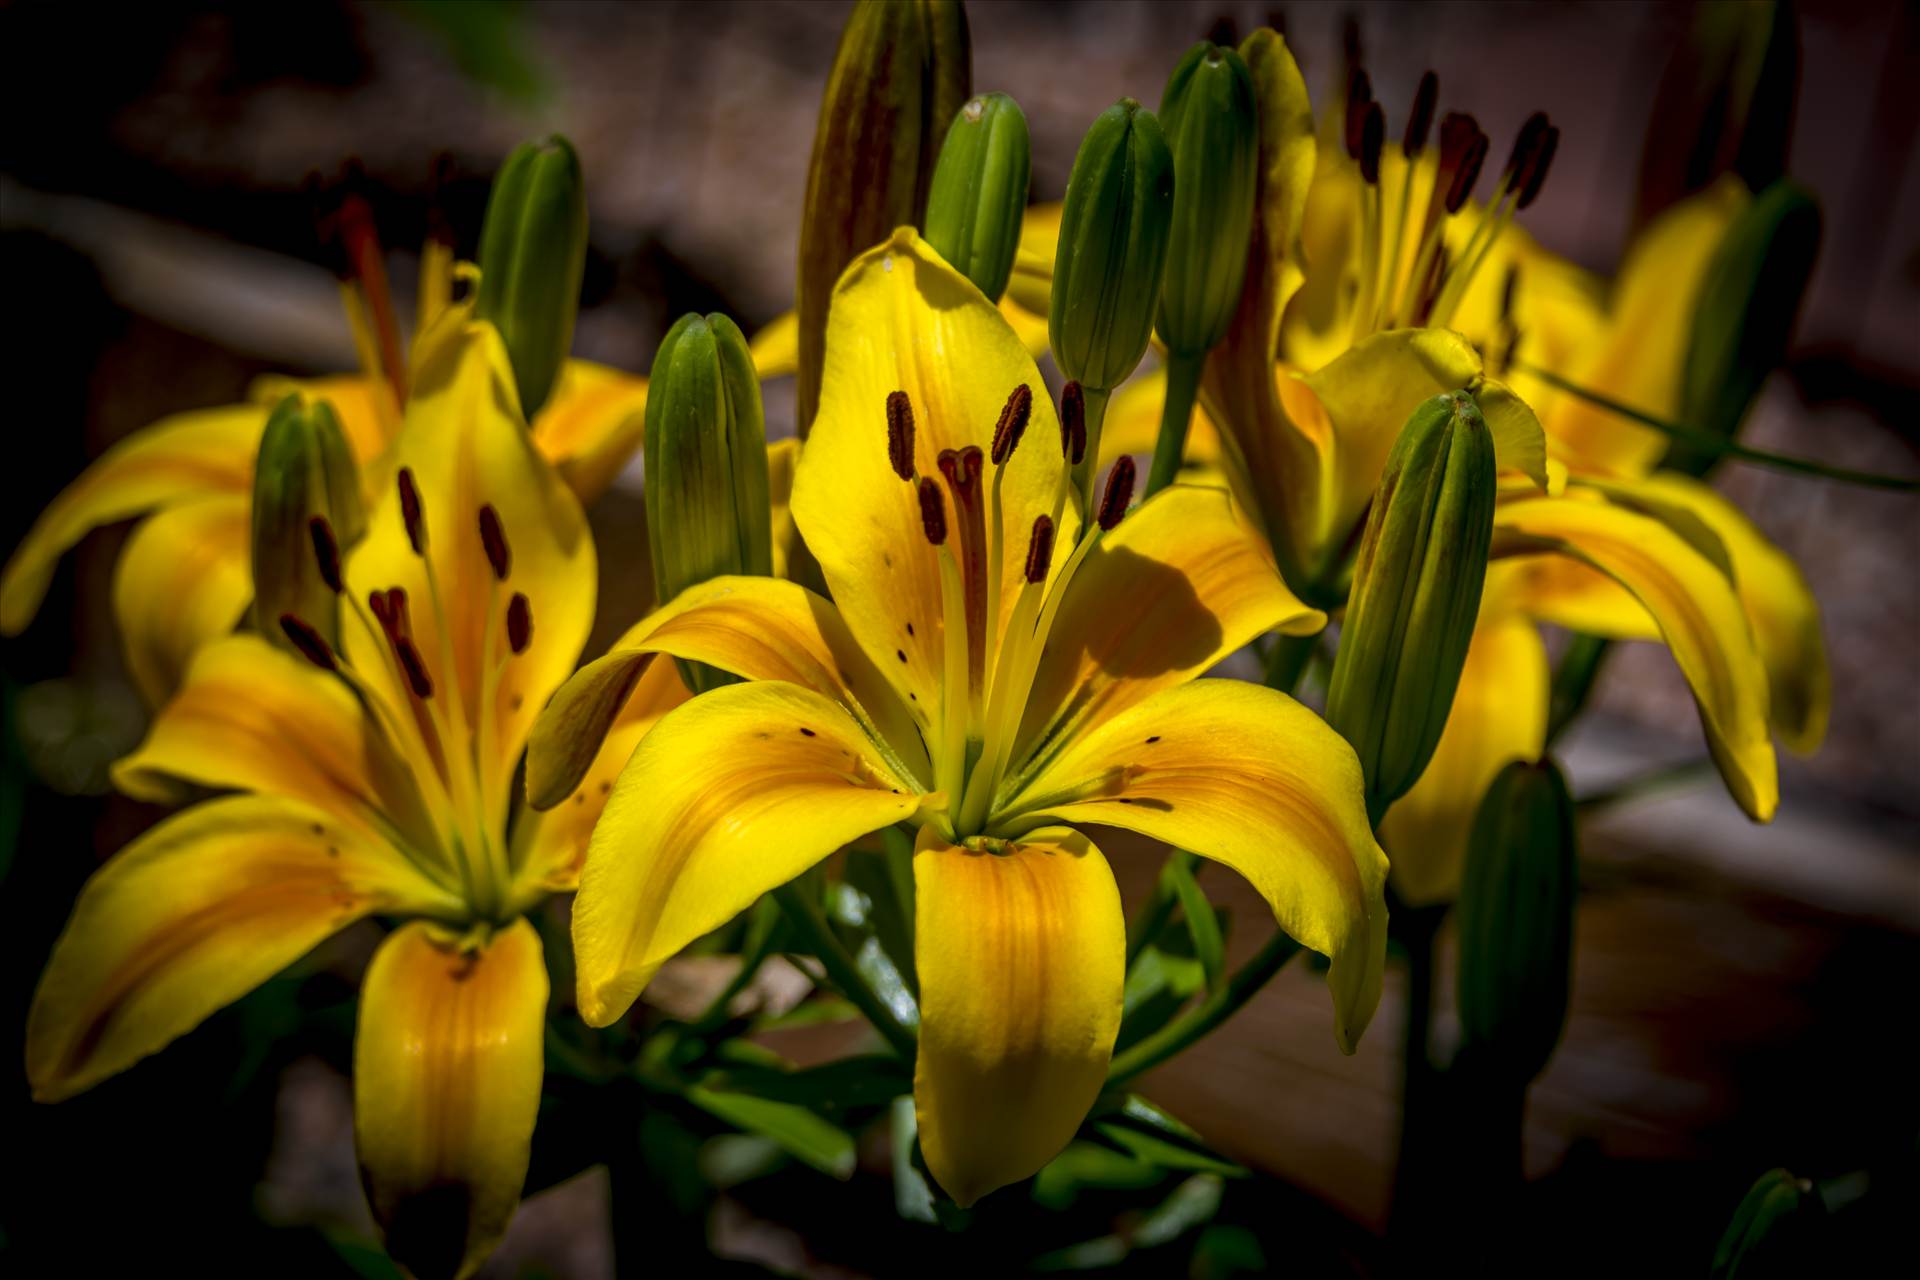 Lilies from the Garden.jpg - Lilies from the Garden by Dennis Rose